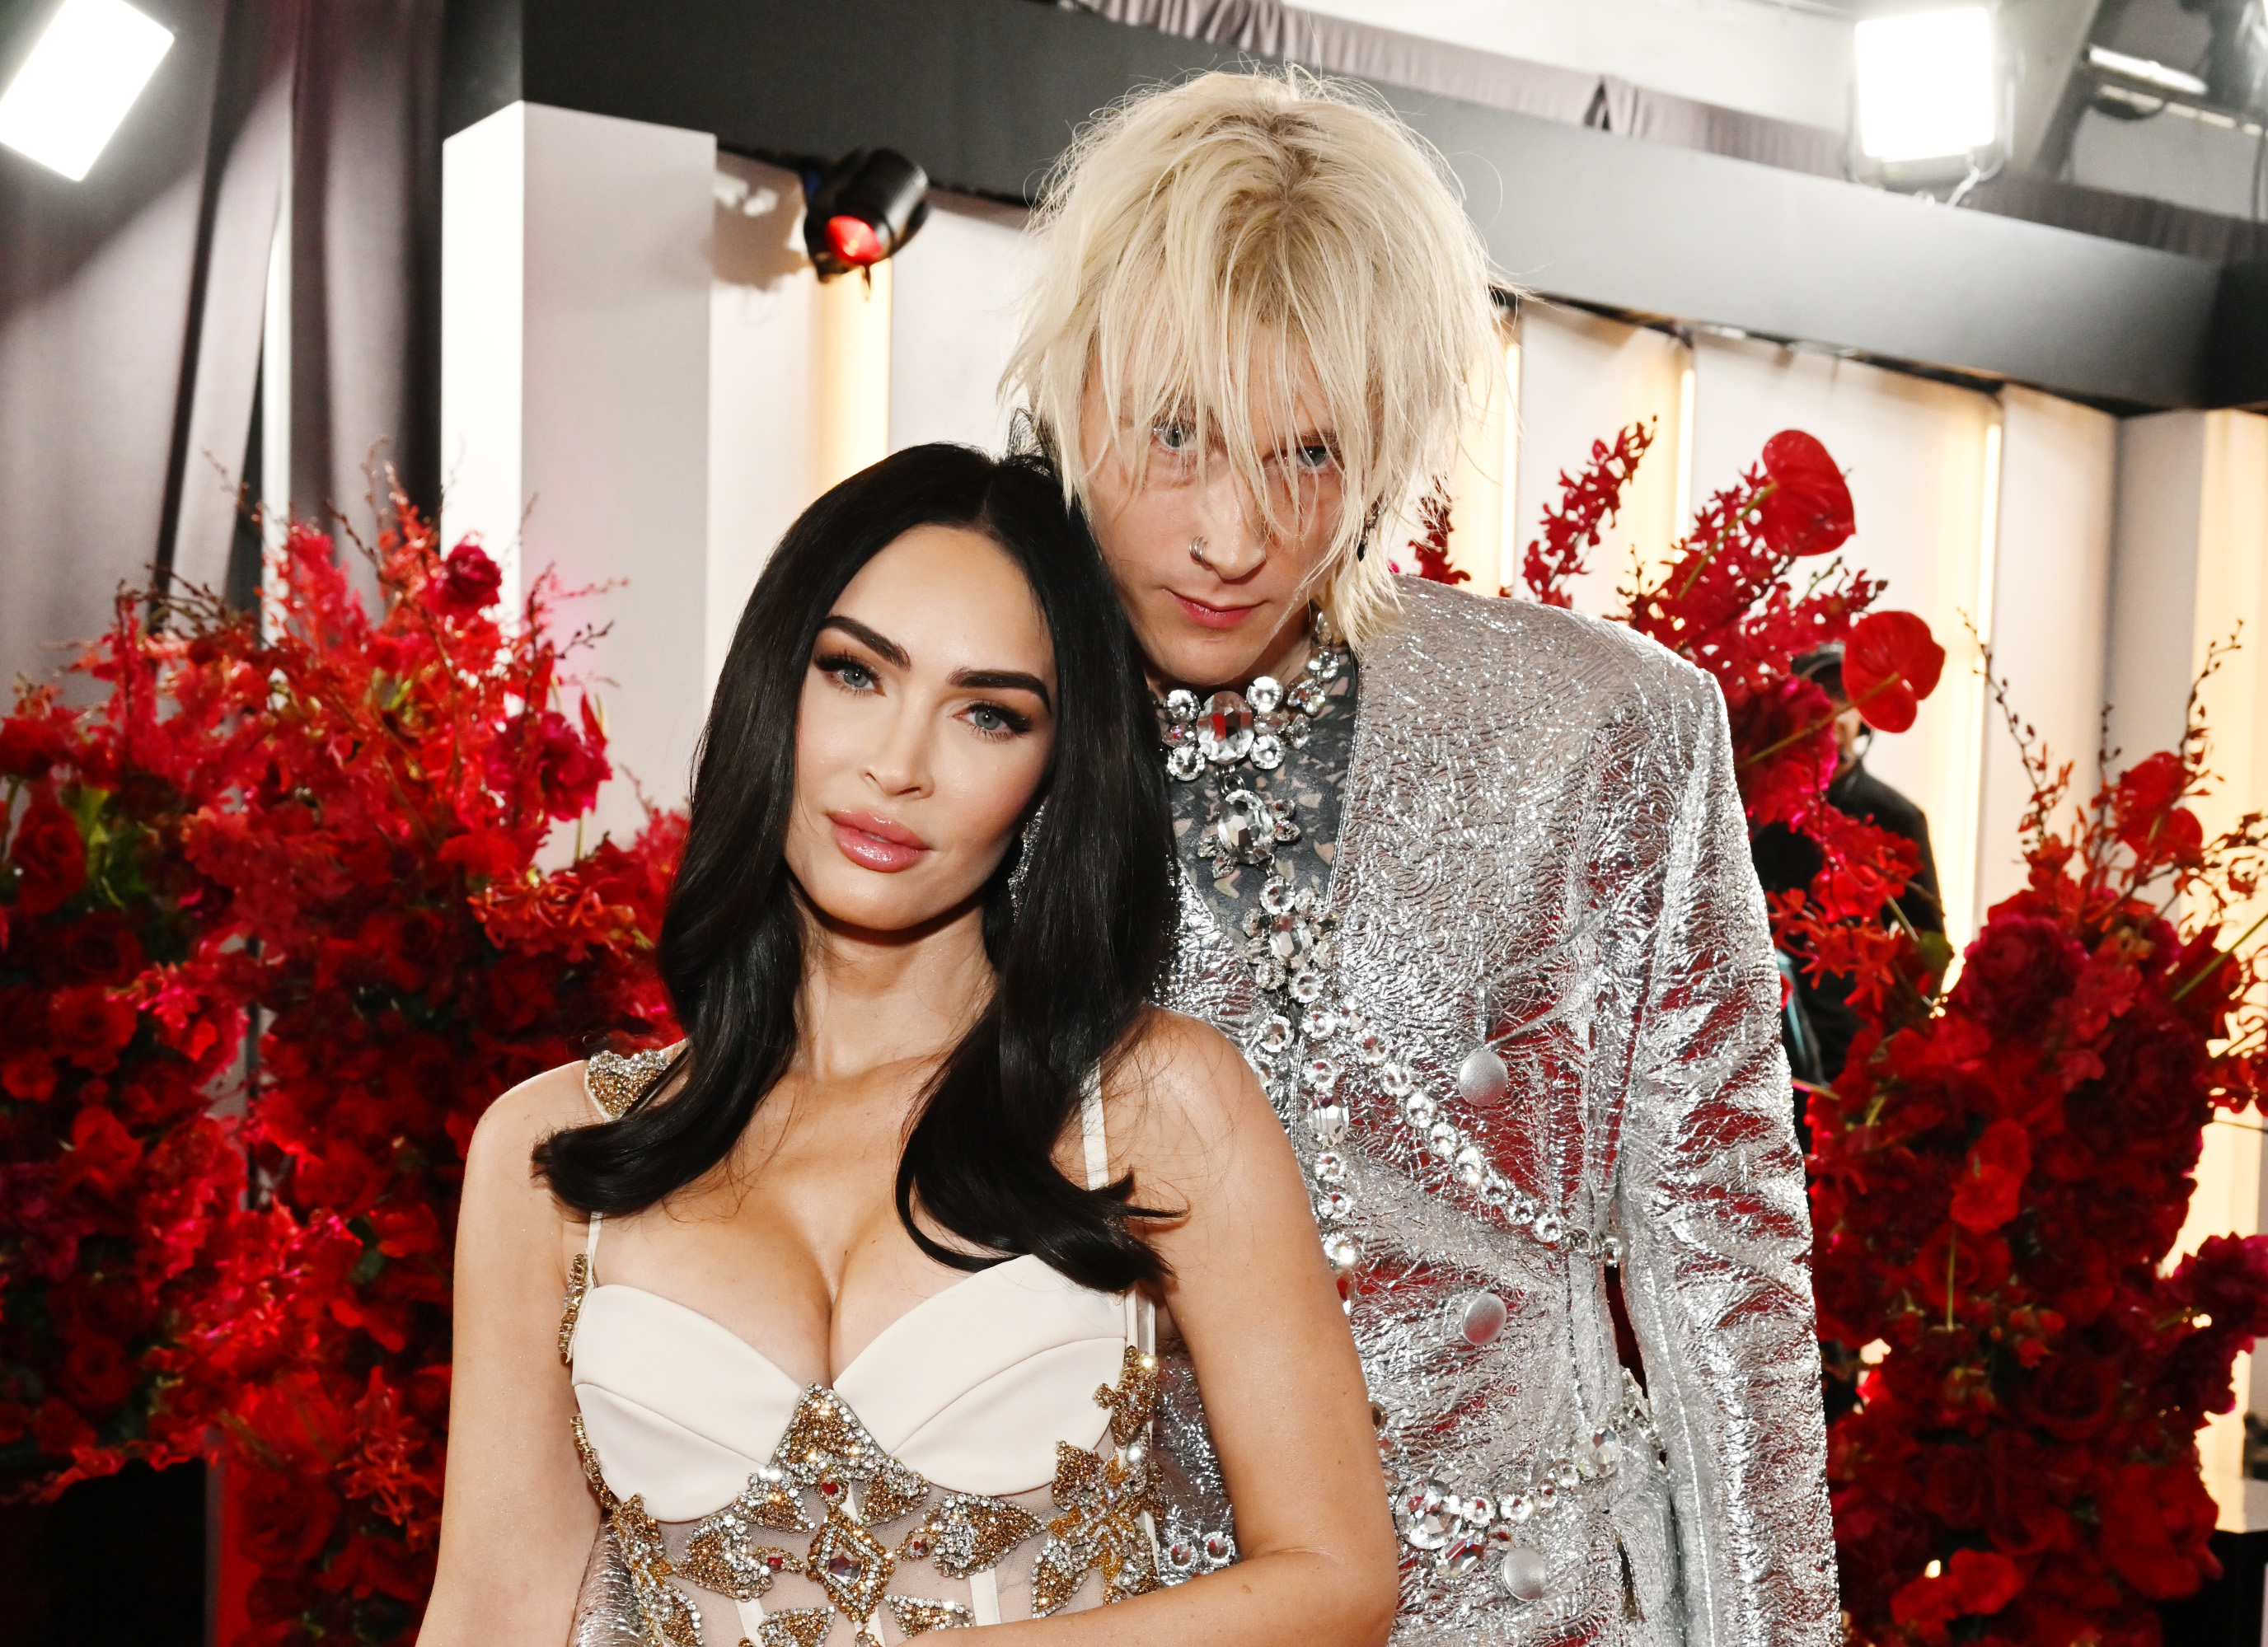 Megan in a bejeweled gown with deep neckline, posing with MGK in a glittery suit at a media event